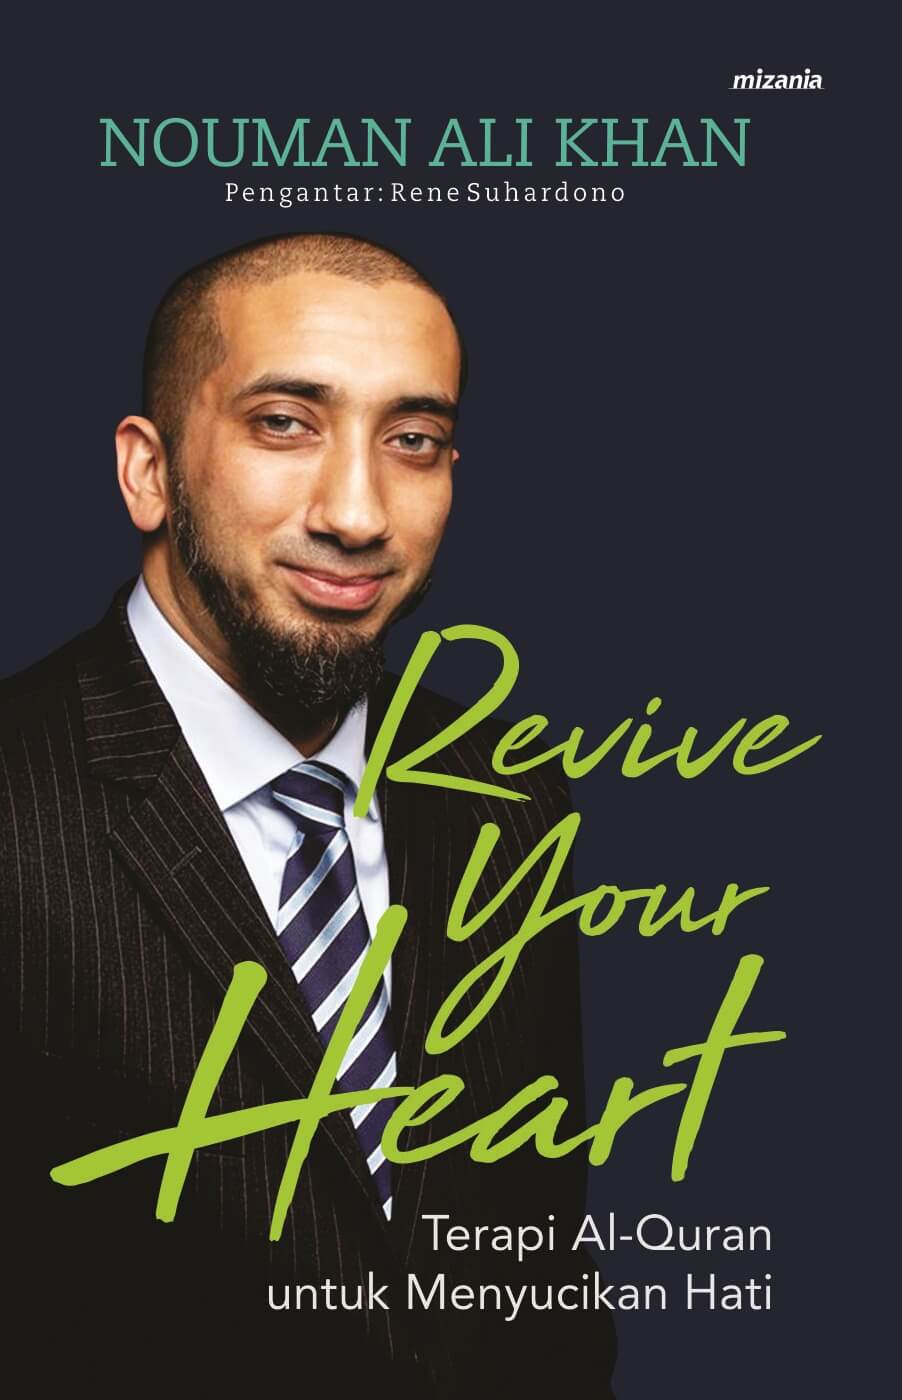 REVIVE YOUR HEART